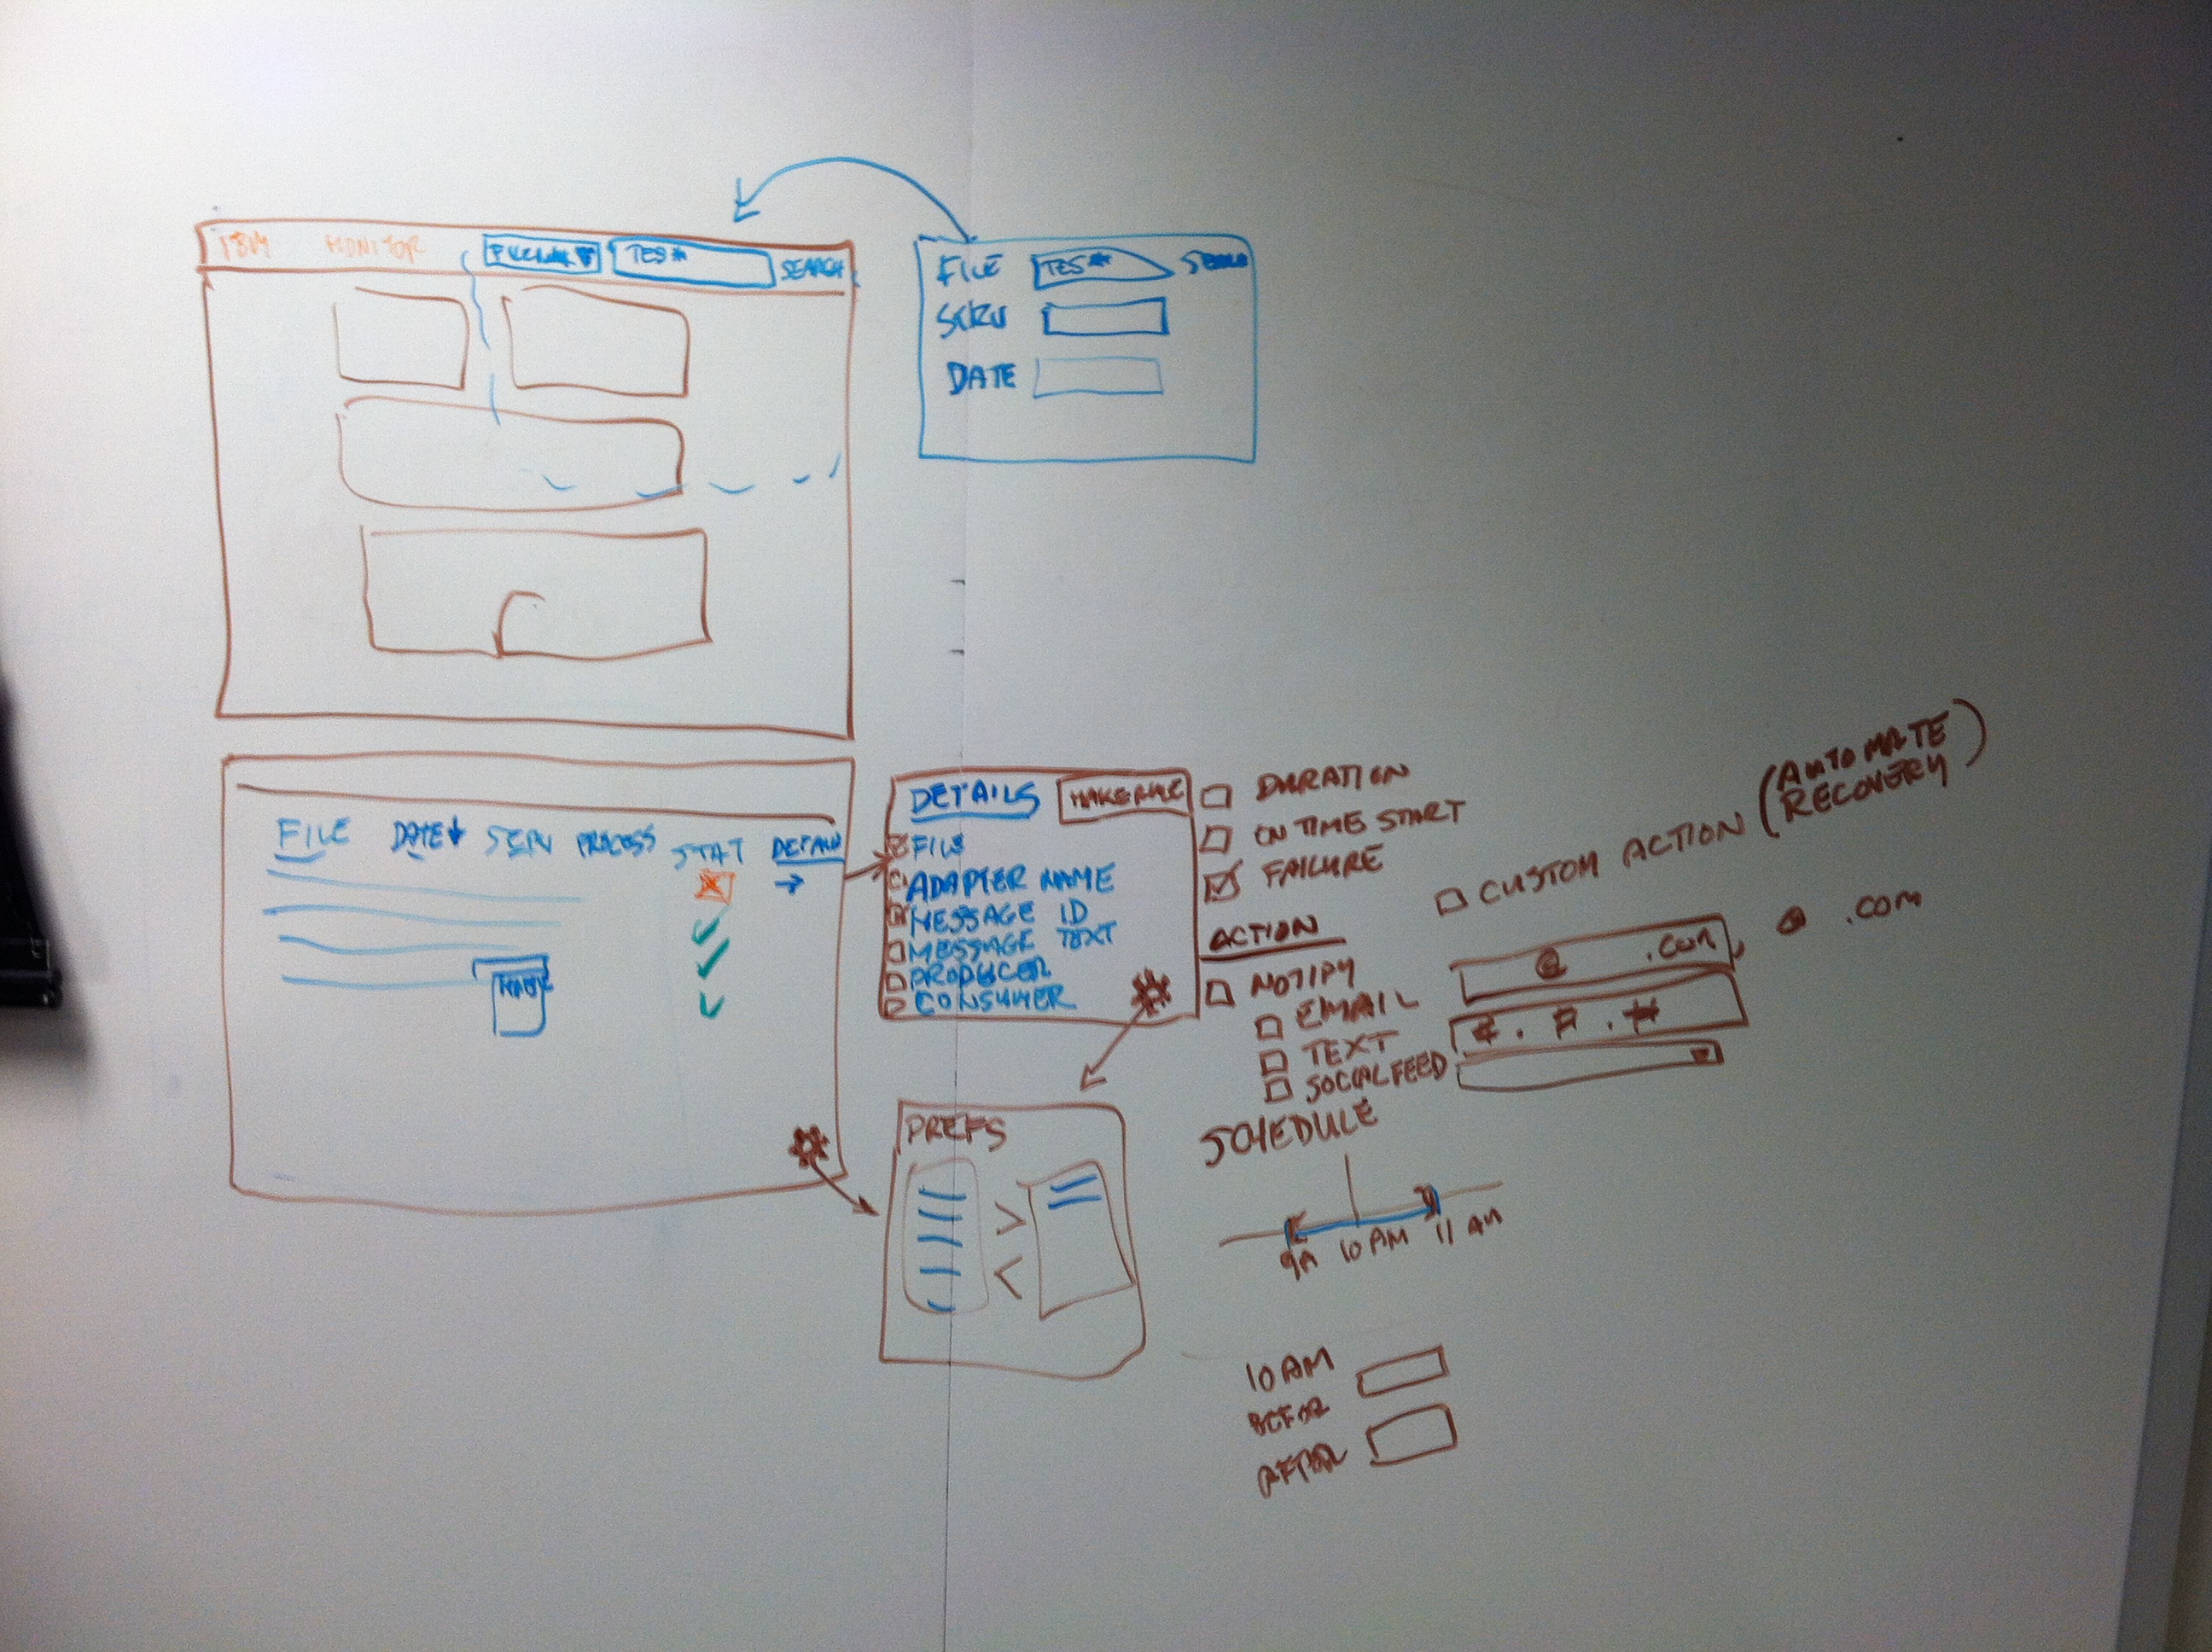 Another whiteboard showing some rough hand-drawn sketches the whole team was collaborating on.